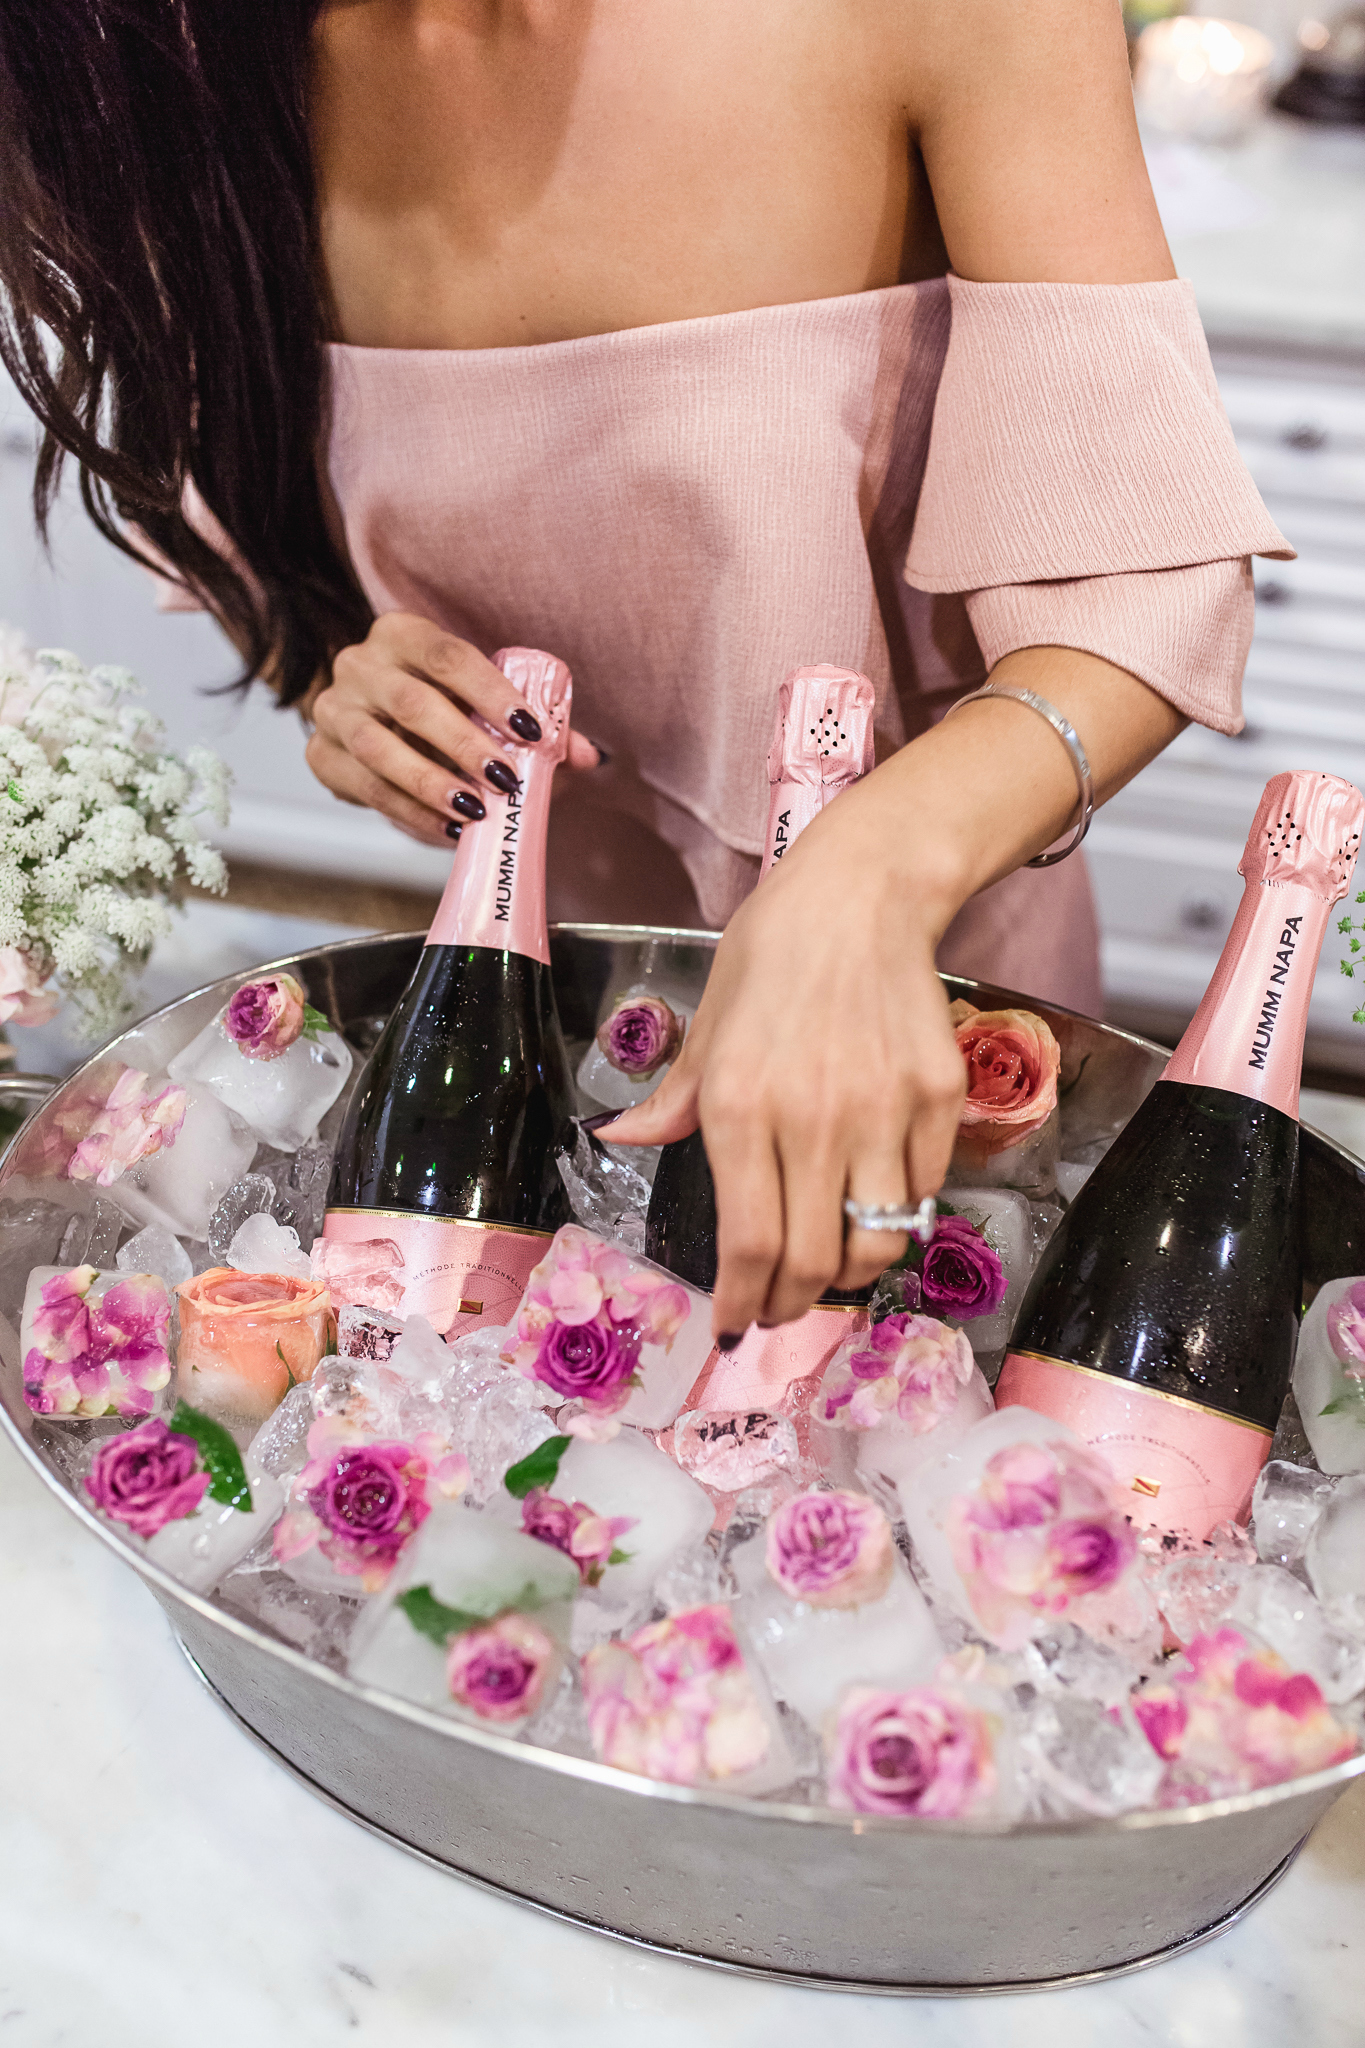 DIY floral ice cubes for a wow effect on your bridal shower decor. // Pin it: How to Slay a Bridal Shower with 10 Epic DIY Ideas // https://mysweetengagement.com